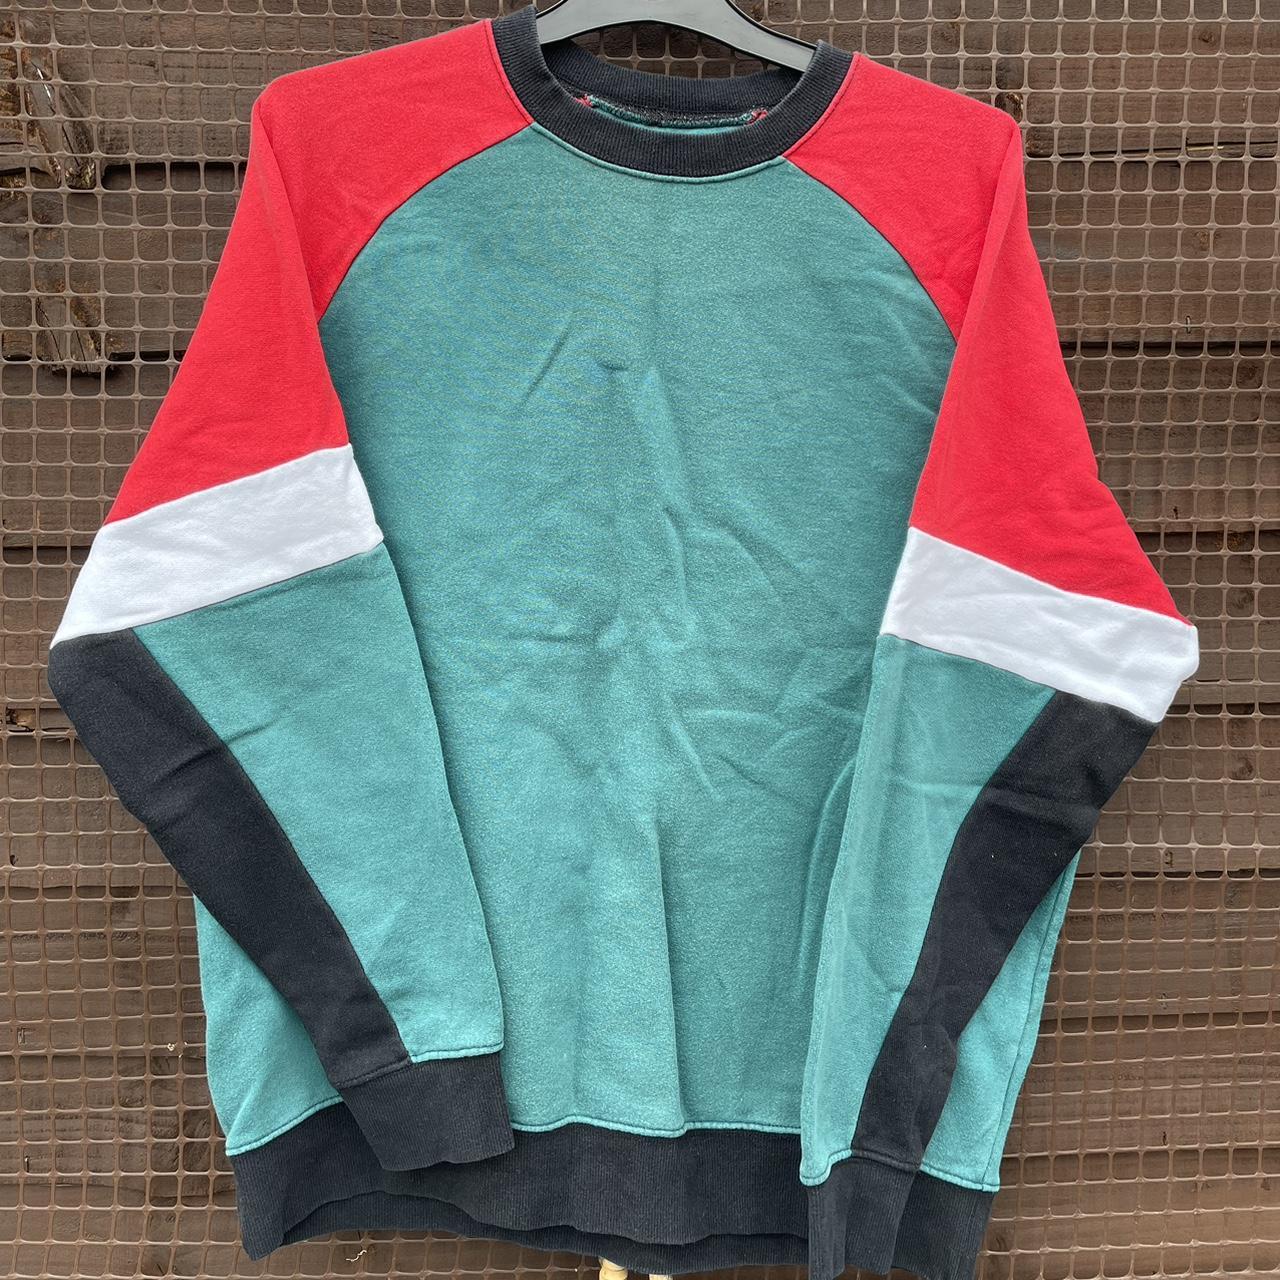 Urban Outfitters Men's Green and Red Sweatshirt | Depop